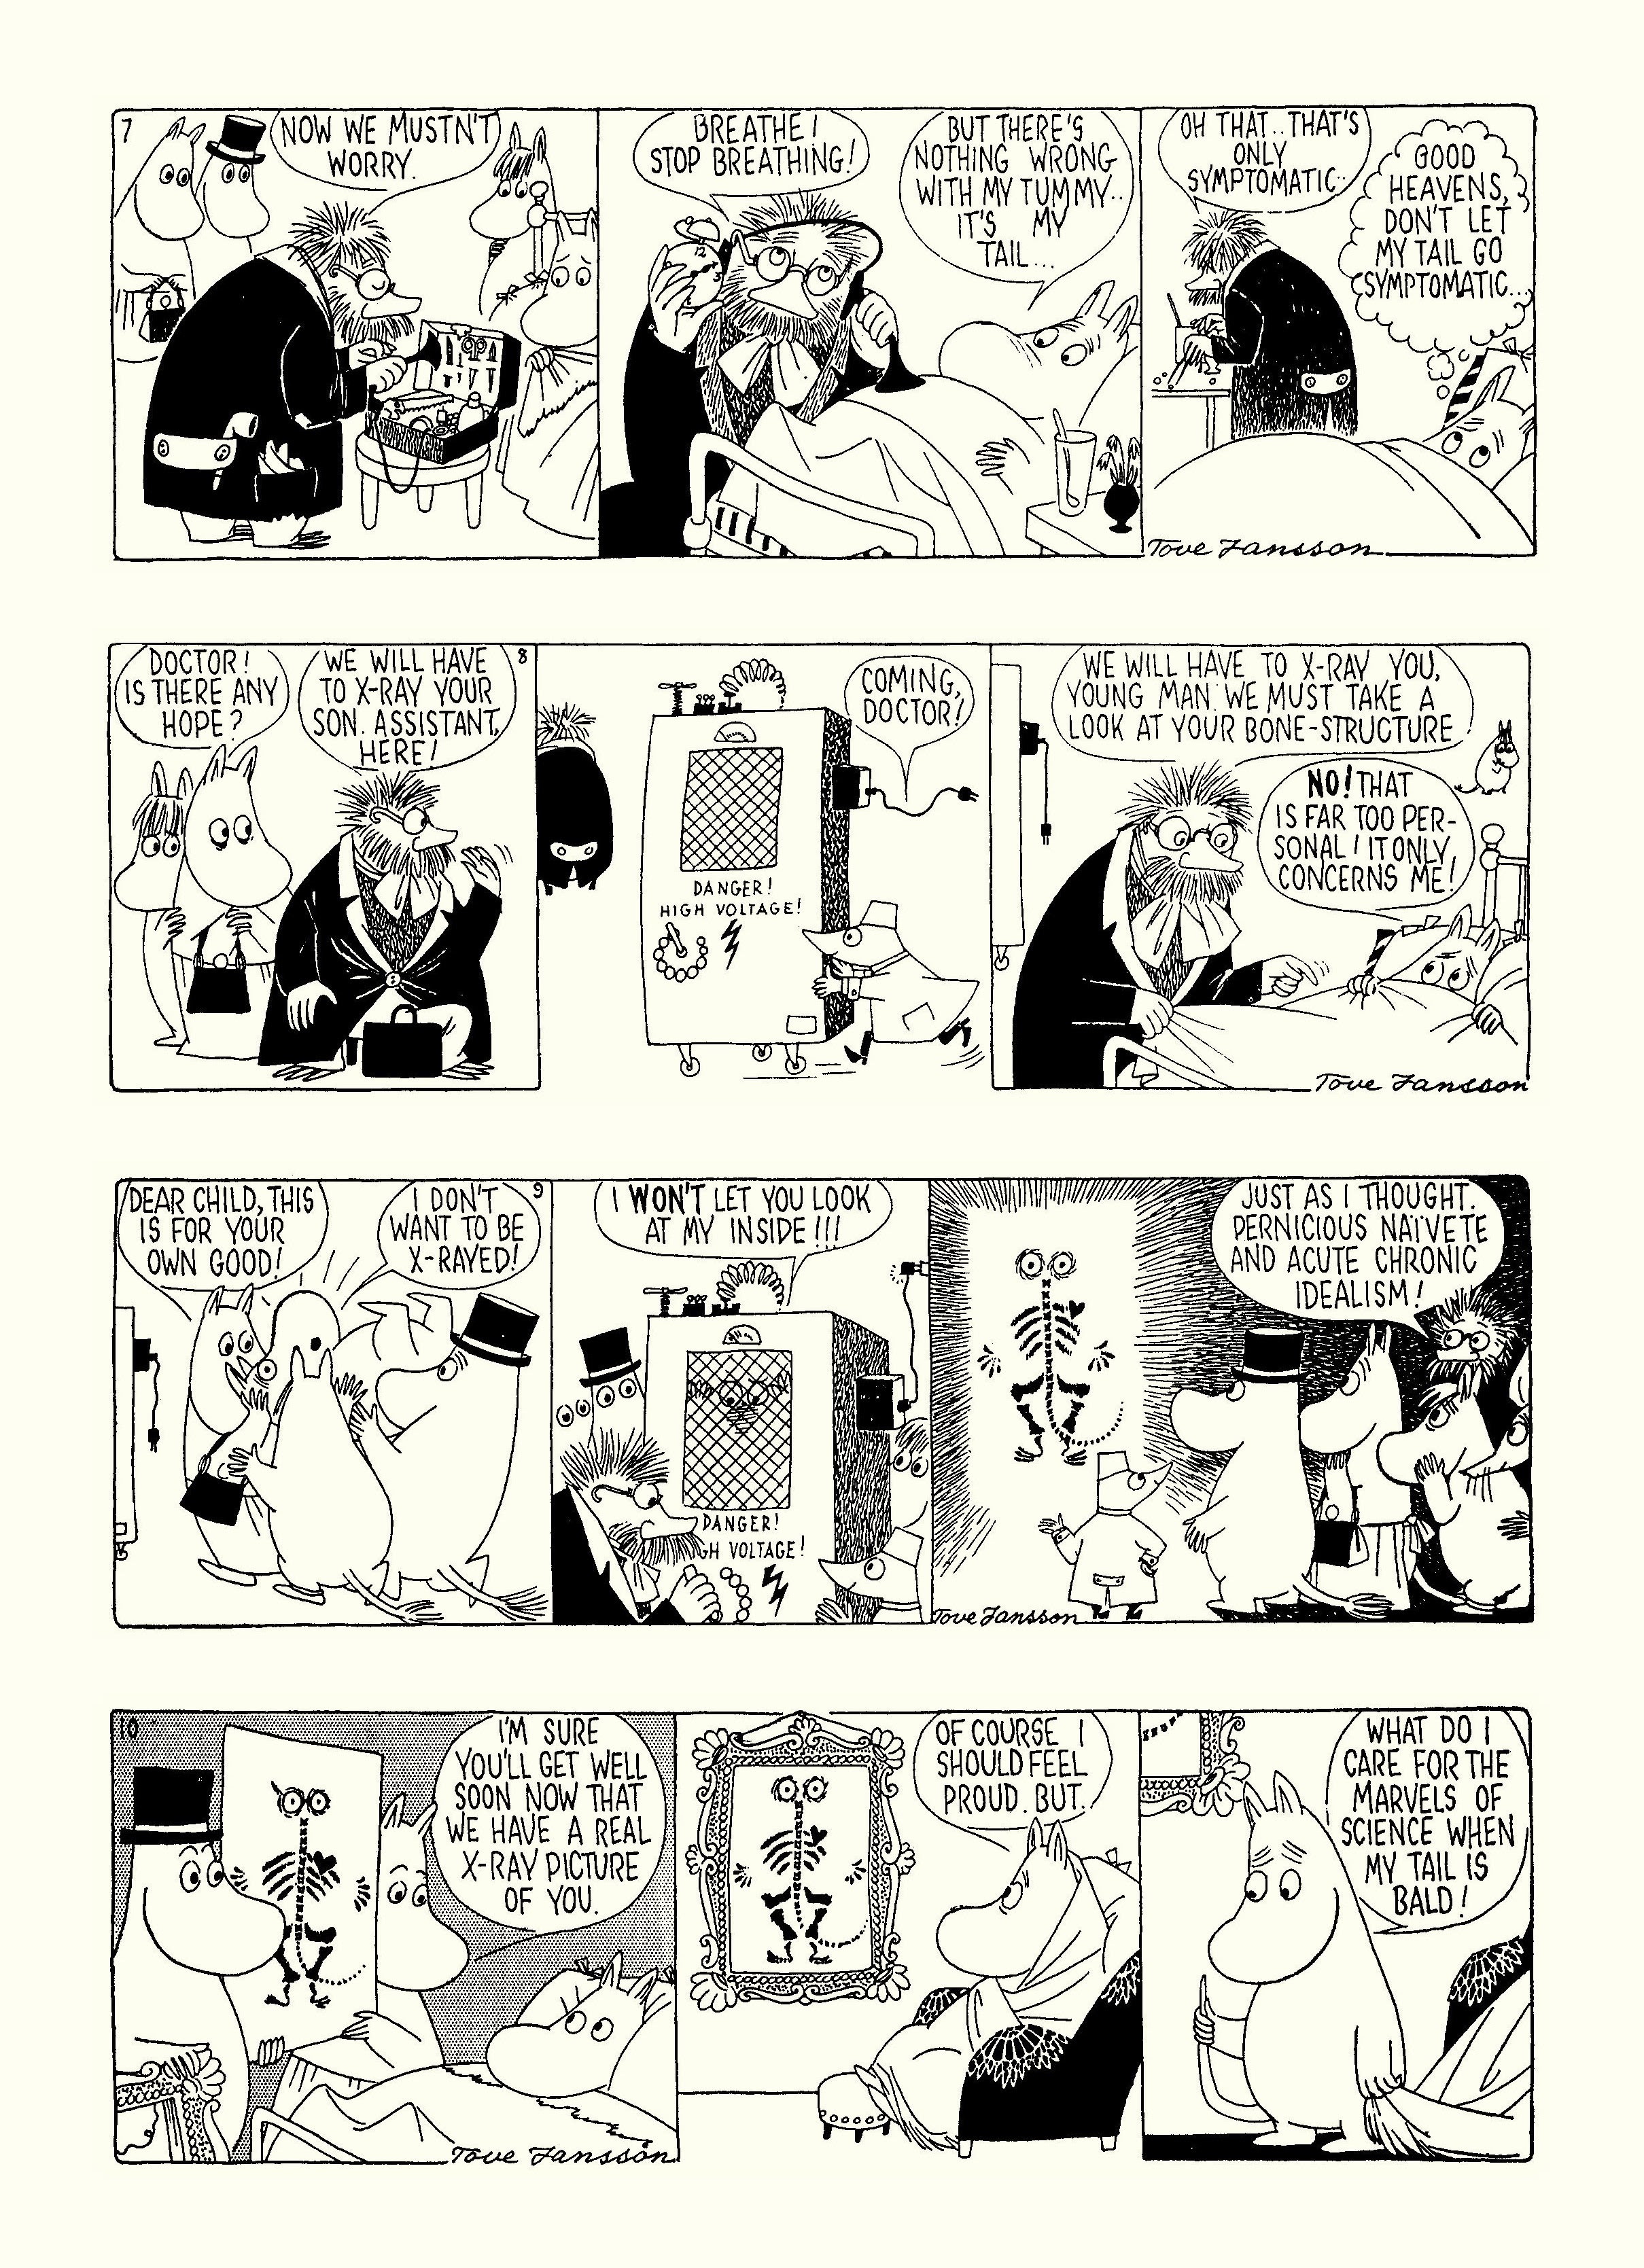 Read online Moomin: The Complete Tove Jansson Comic Strip comic -  Issue # TPB 4 - 81